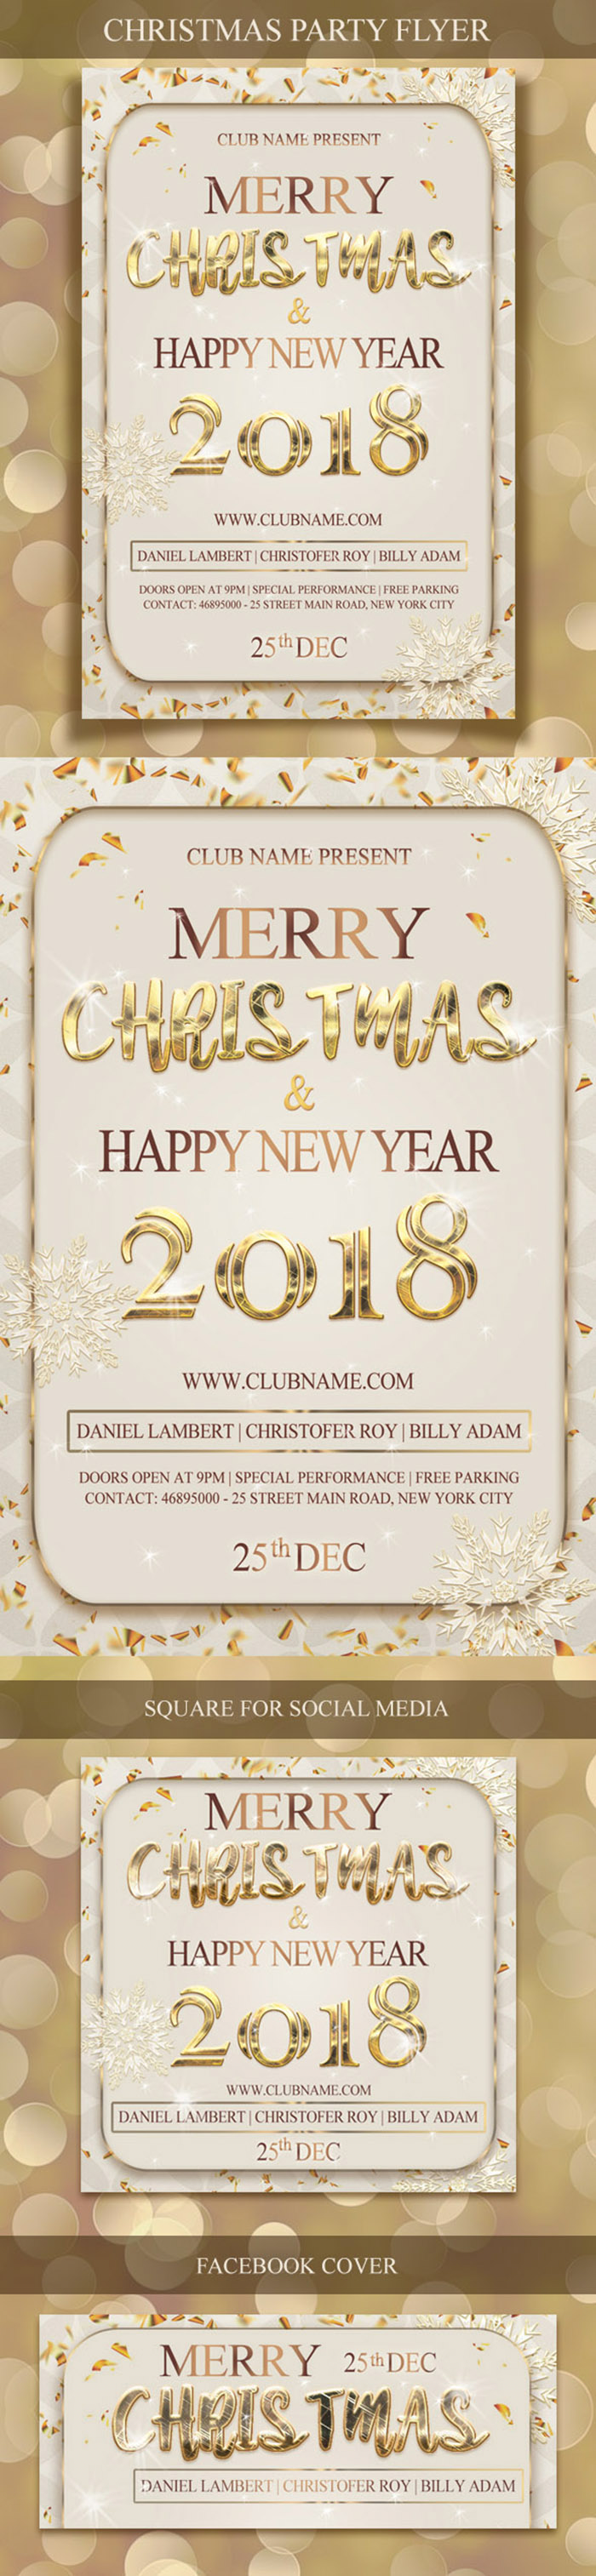 Christmas party flyer christmas eve Event christmas flyer christmas party template classy gold